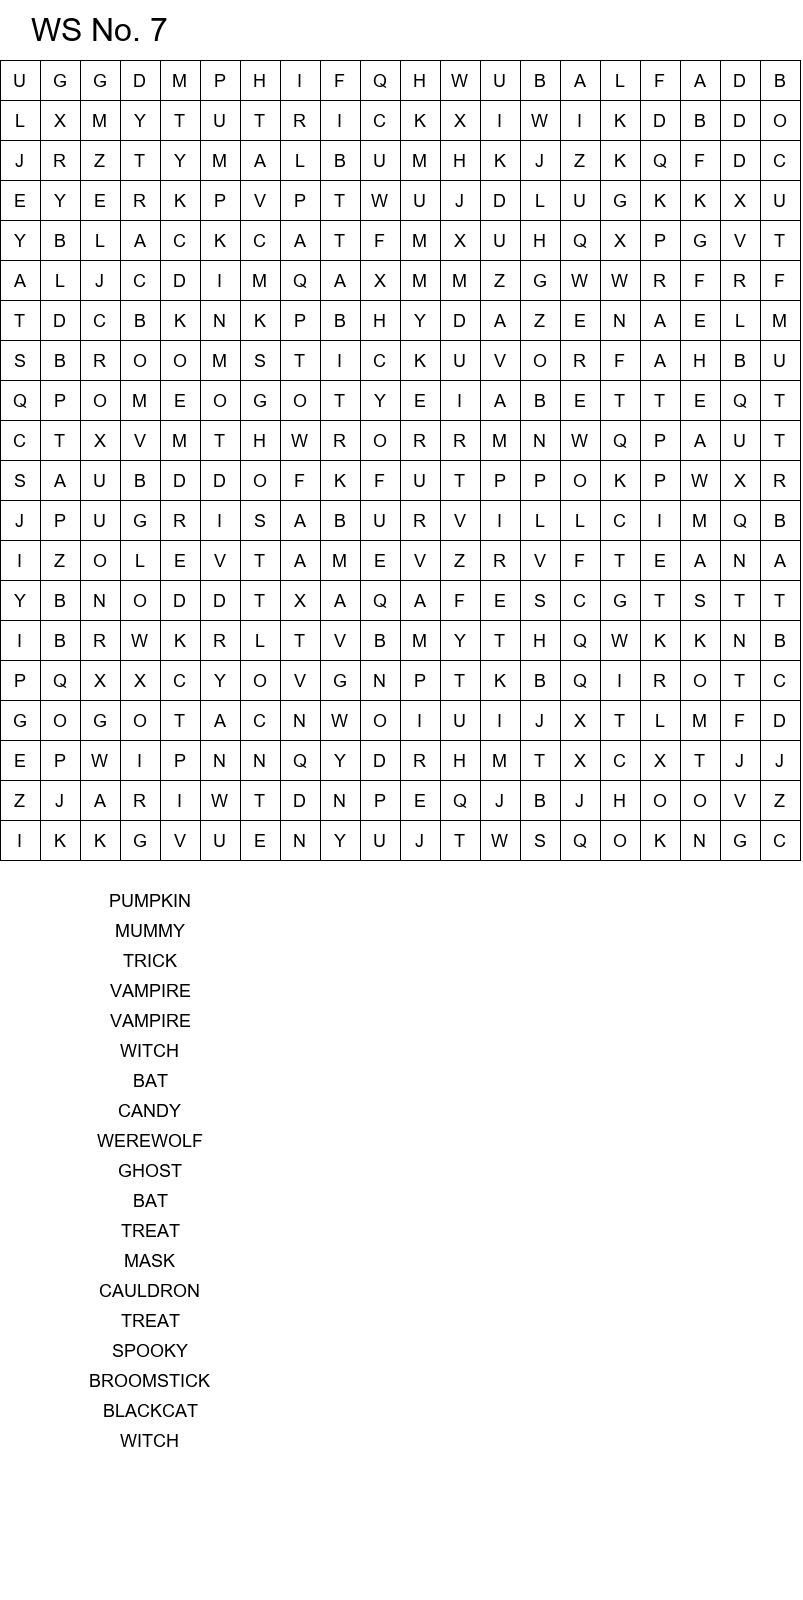 Spooky Halloween word search with solutions size 20x20 No 7